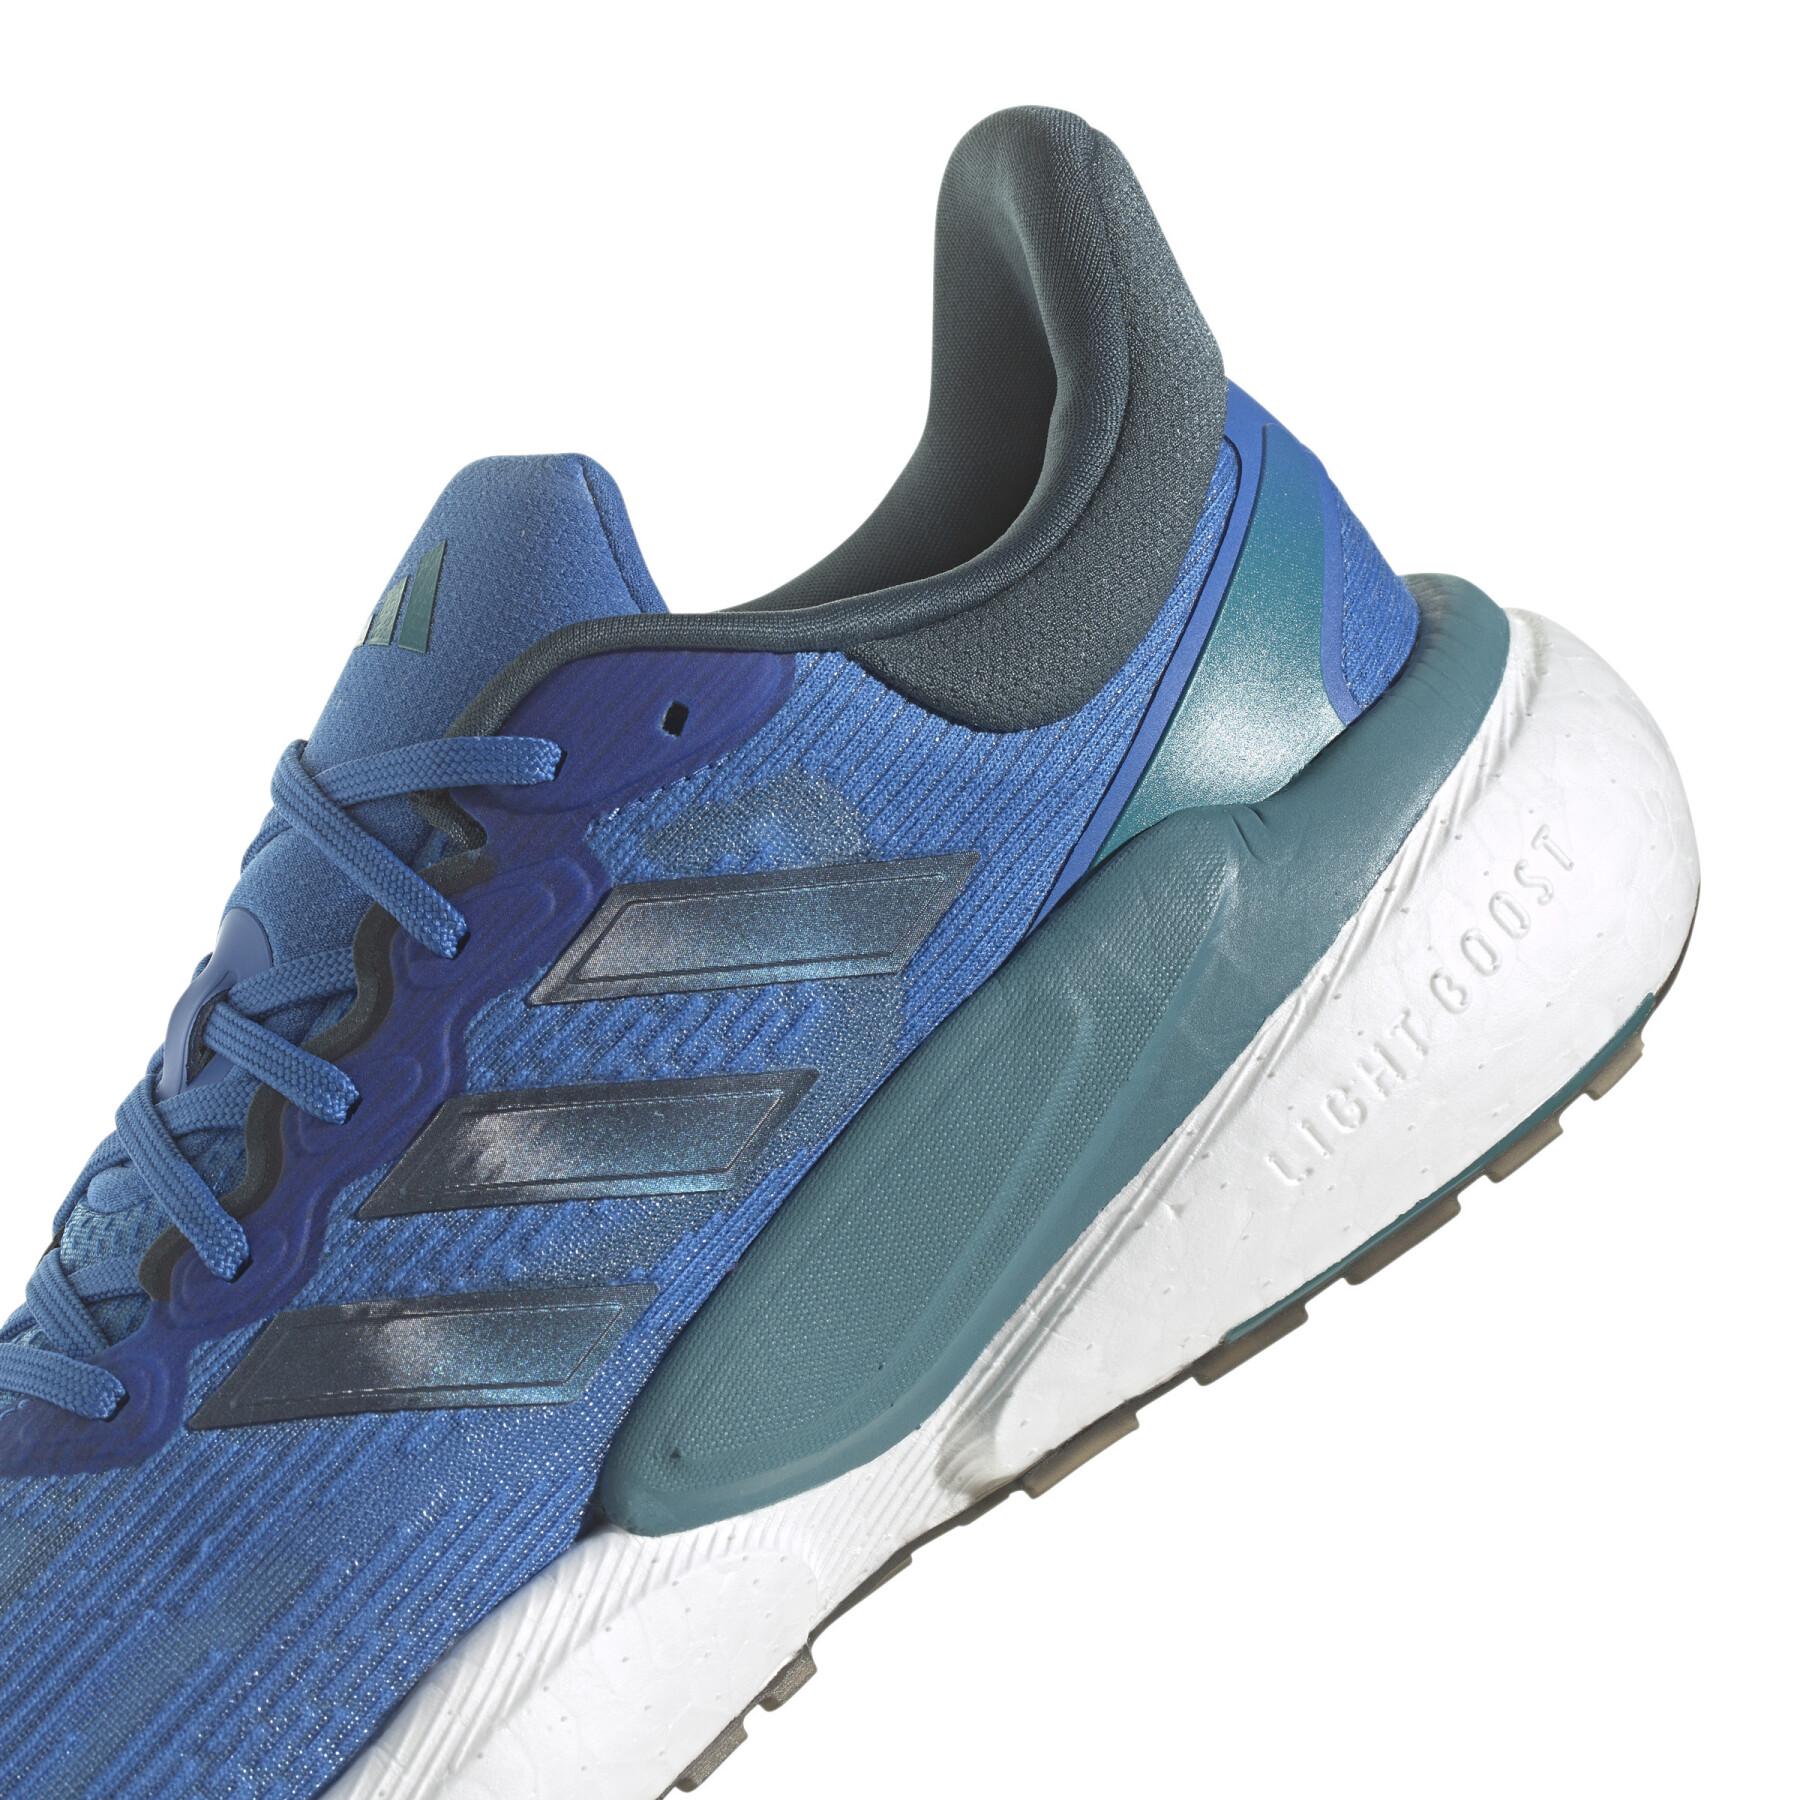 Running shoes adidas SolarBoost 5